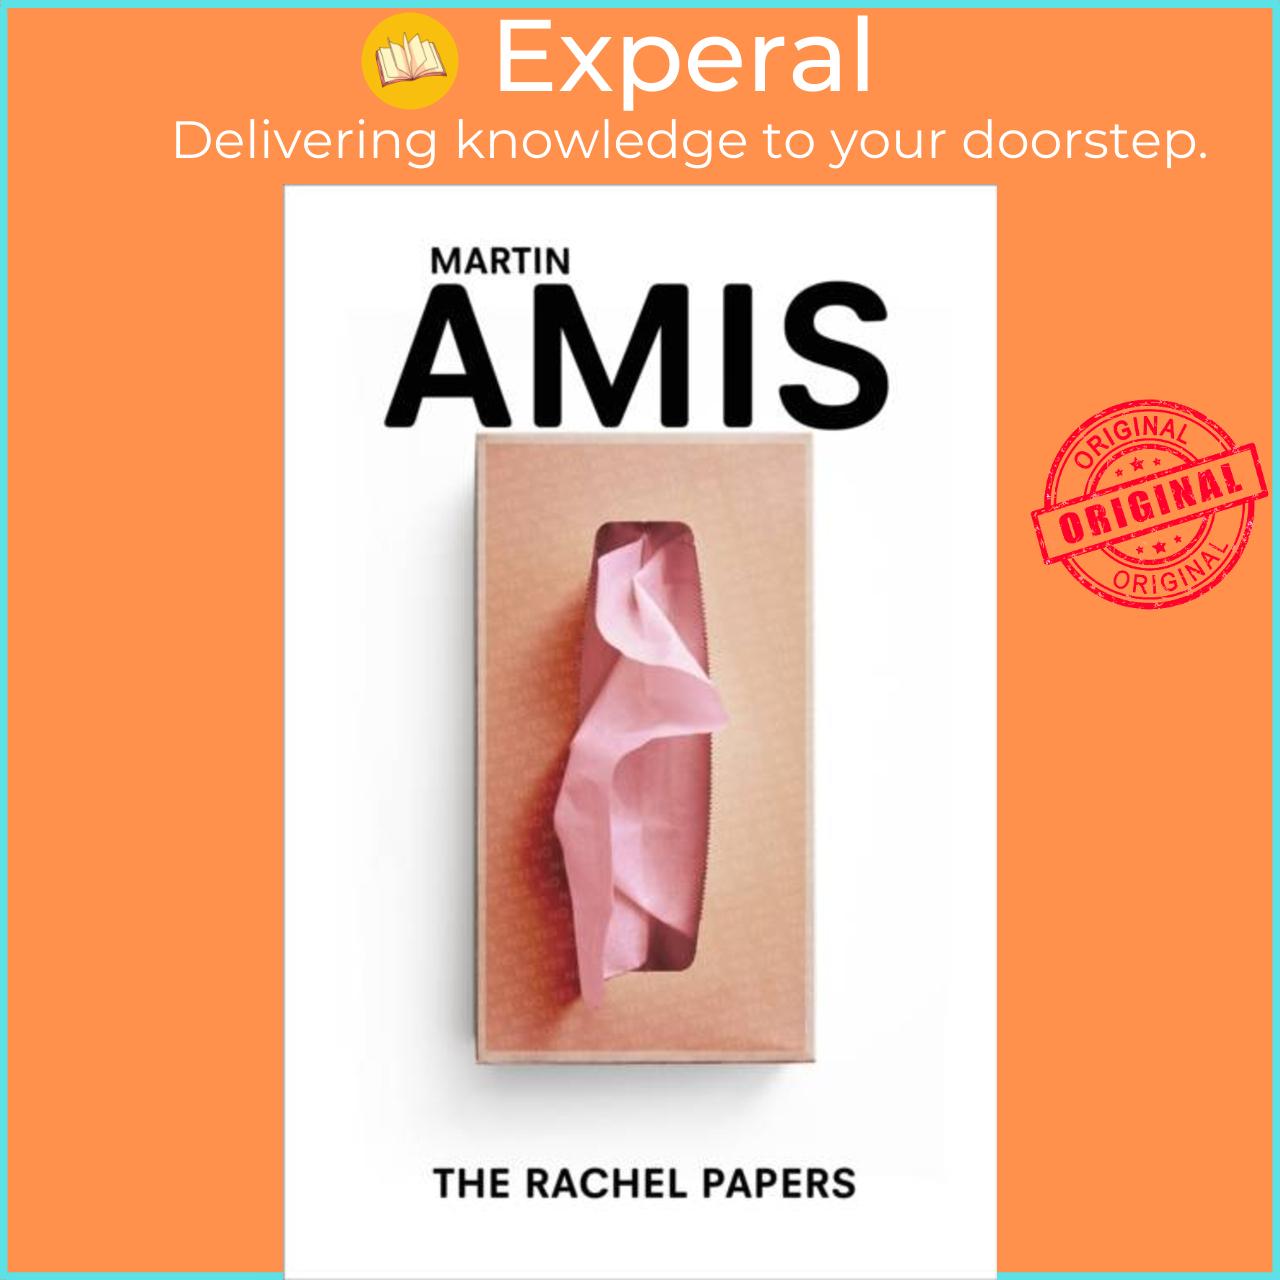 Sách - The Rachel Papers by Martin Amis (UK edition, paperback)